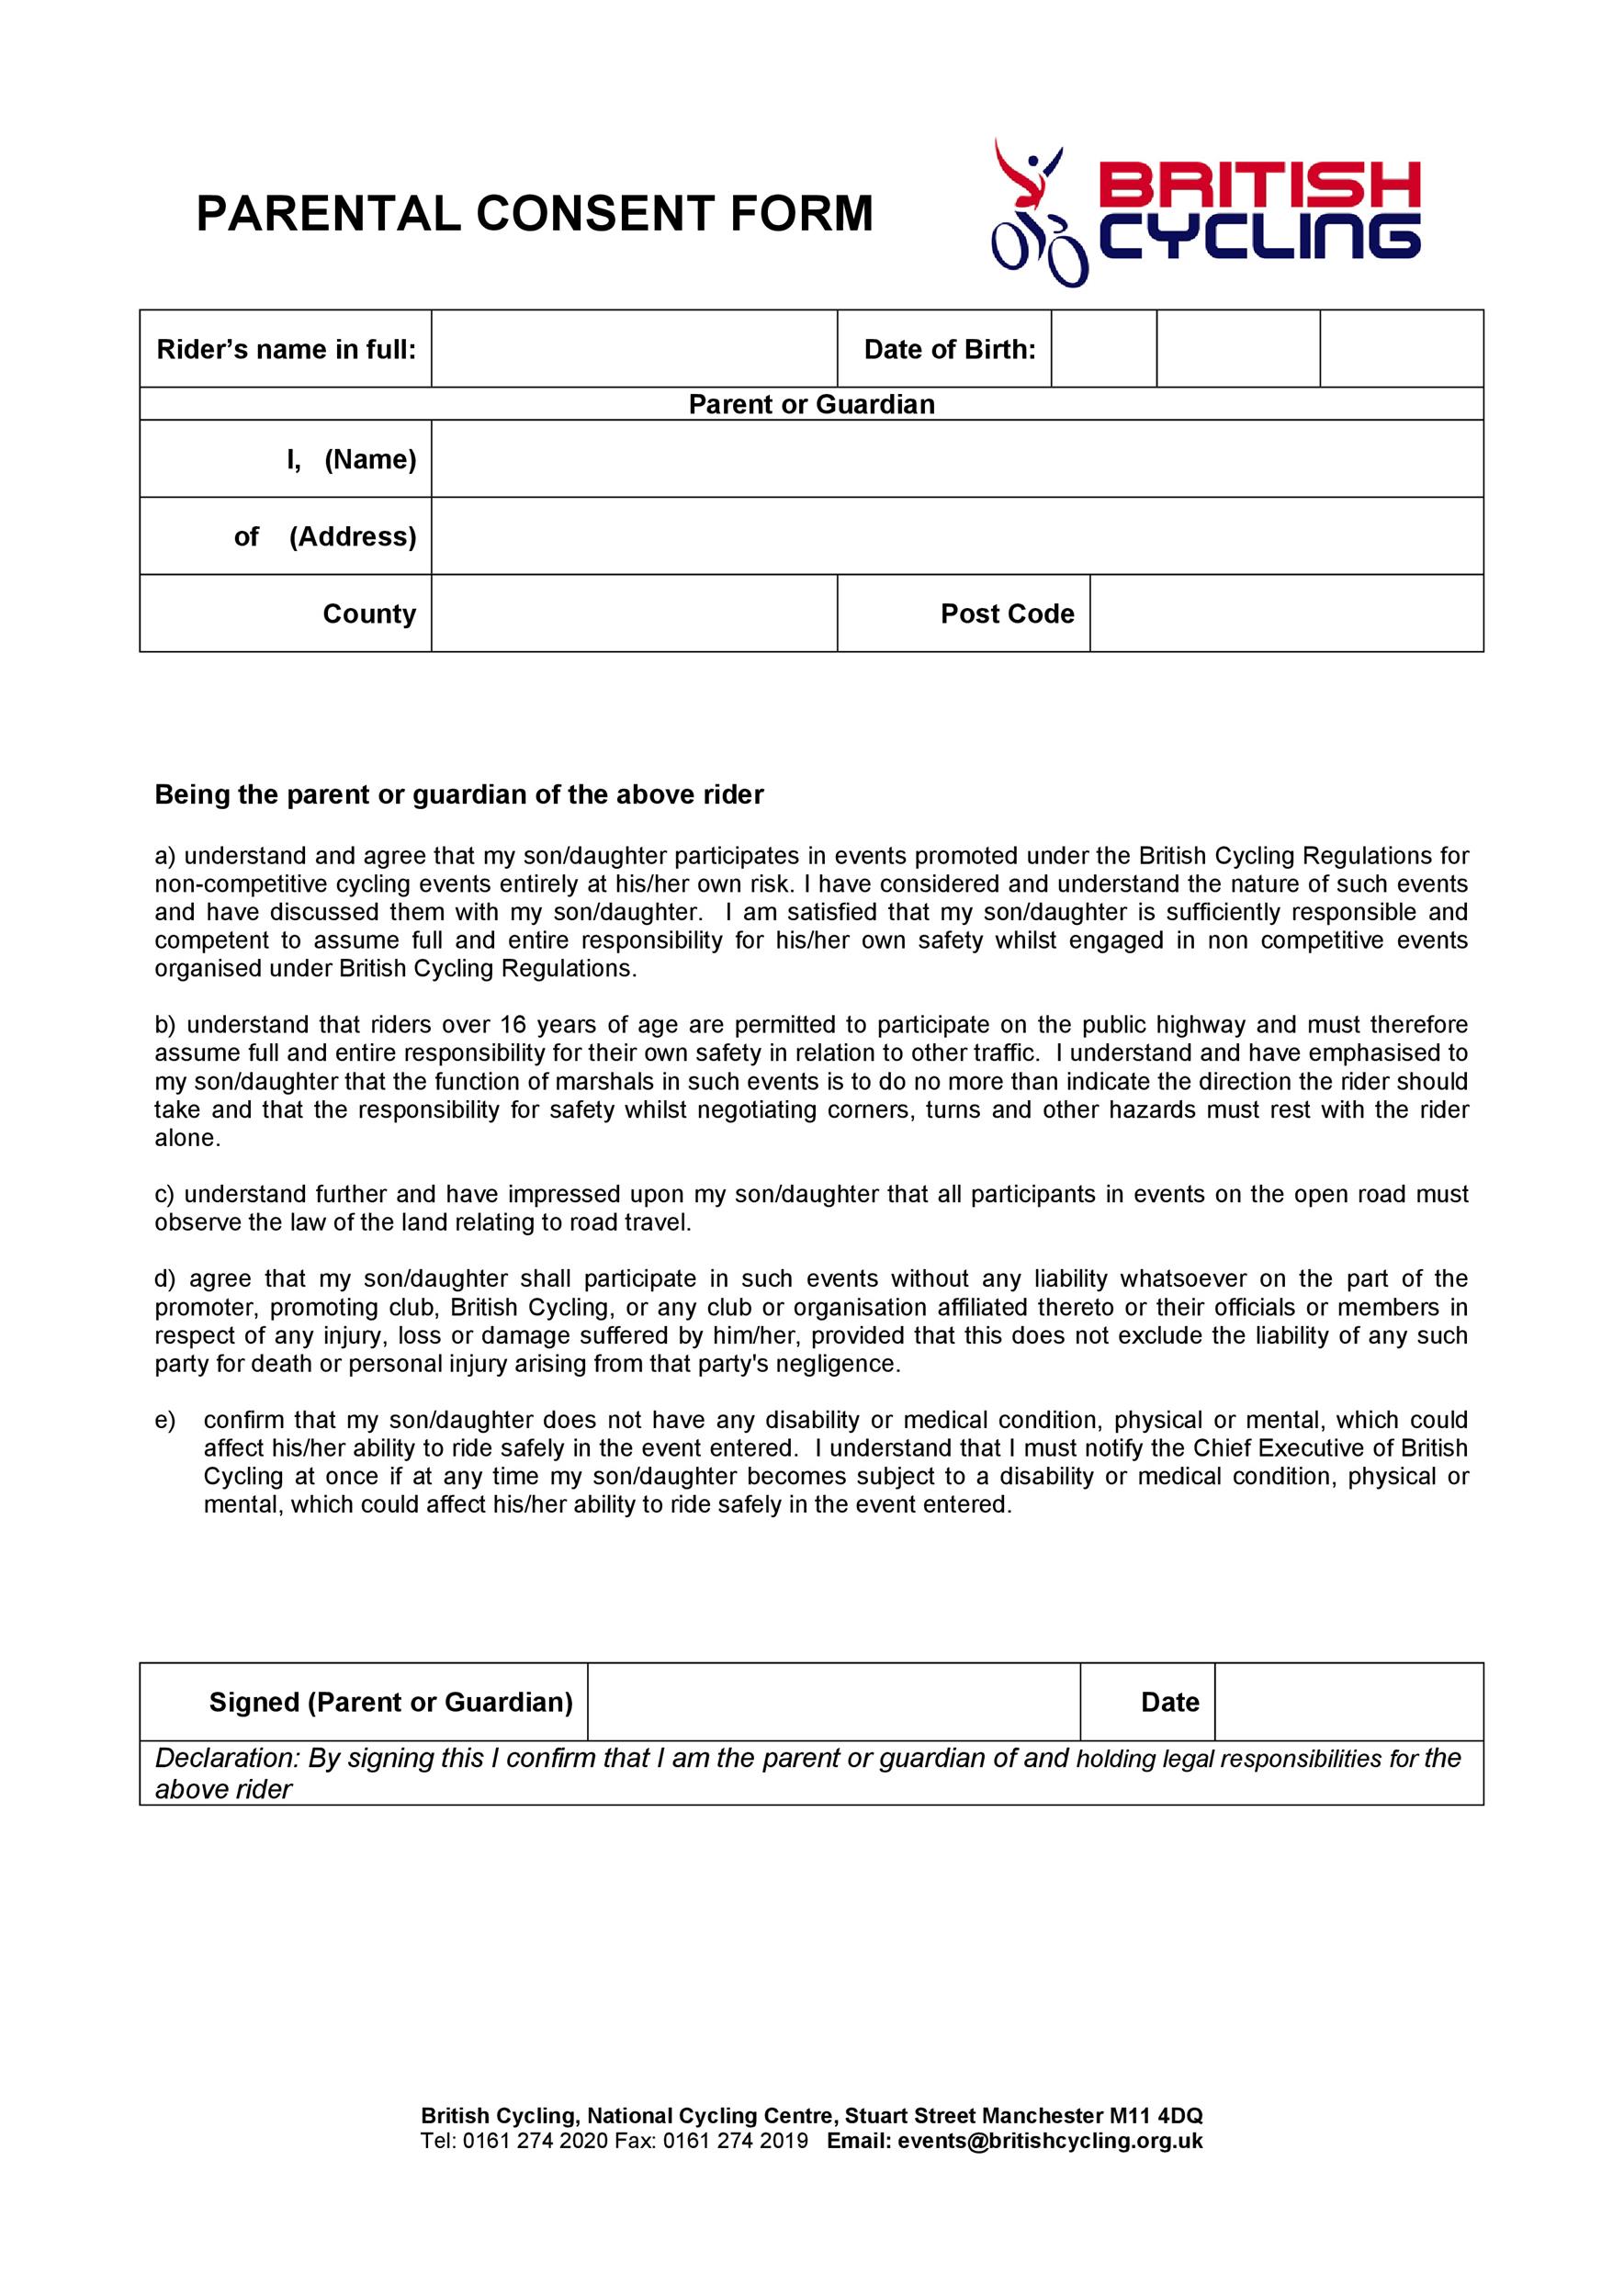 Free parental consent form template 25